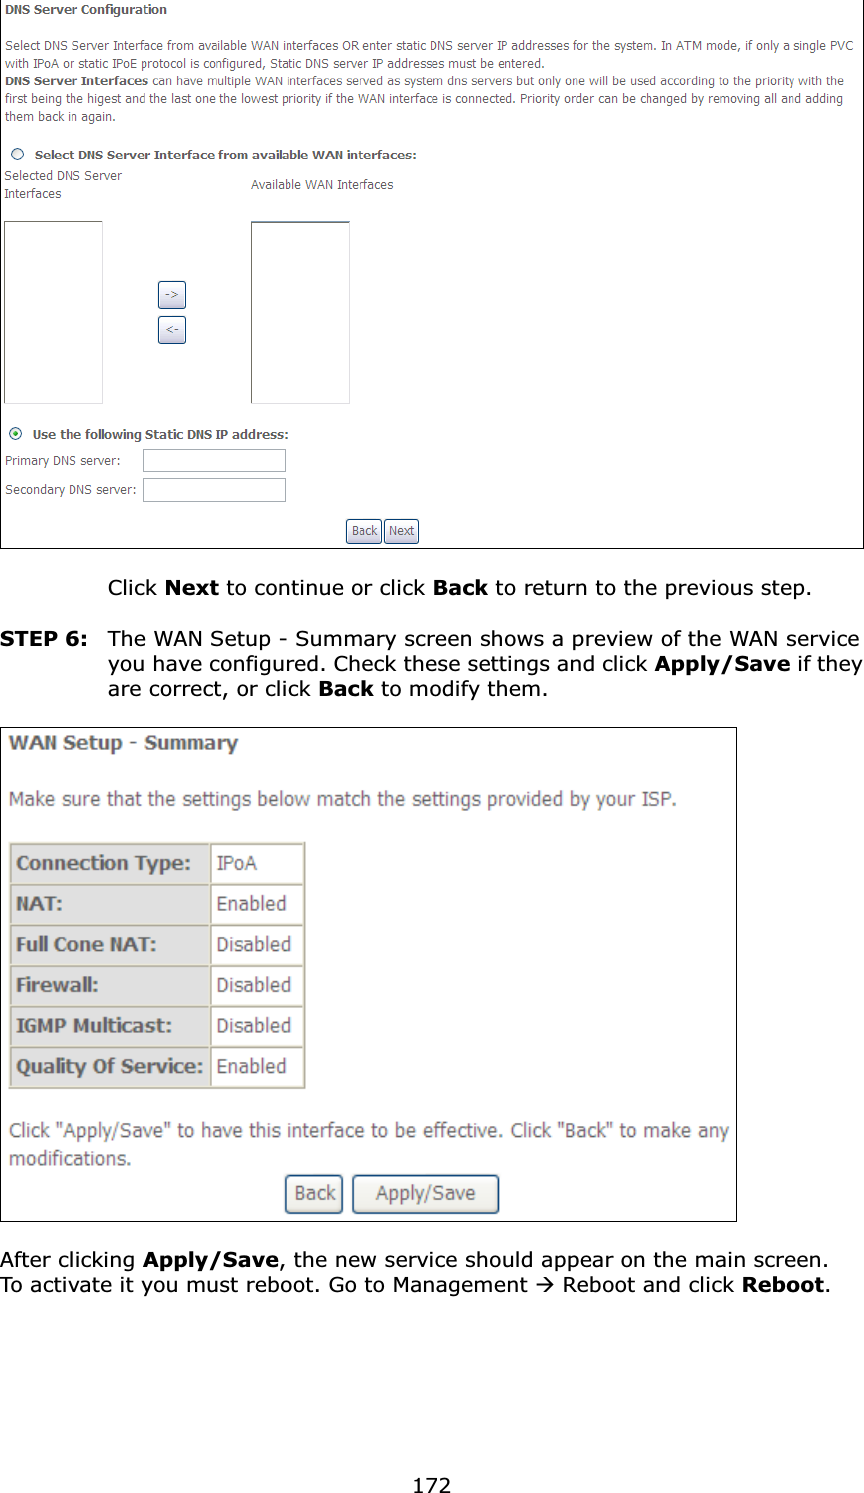 172Click Next to continue or click Back to return to the previous step.STEP 6: The WAN Setup - Summary screen shows a preview of the WAN service you have configured. Check these settings and click Apply/Save if they are correct, or click Back to modify them.After clicking Apply/Save, the new service should appear on the main screen. To activate it you must reboot. Go to Management ÆReboot and click Reboot.